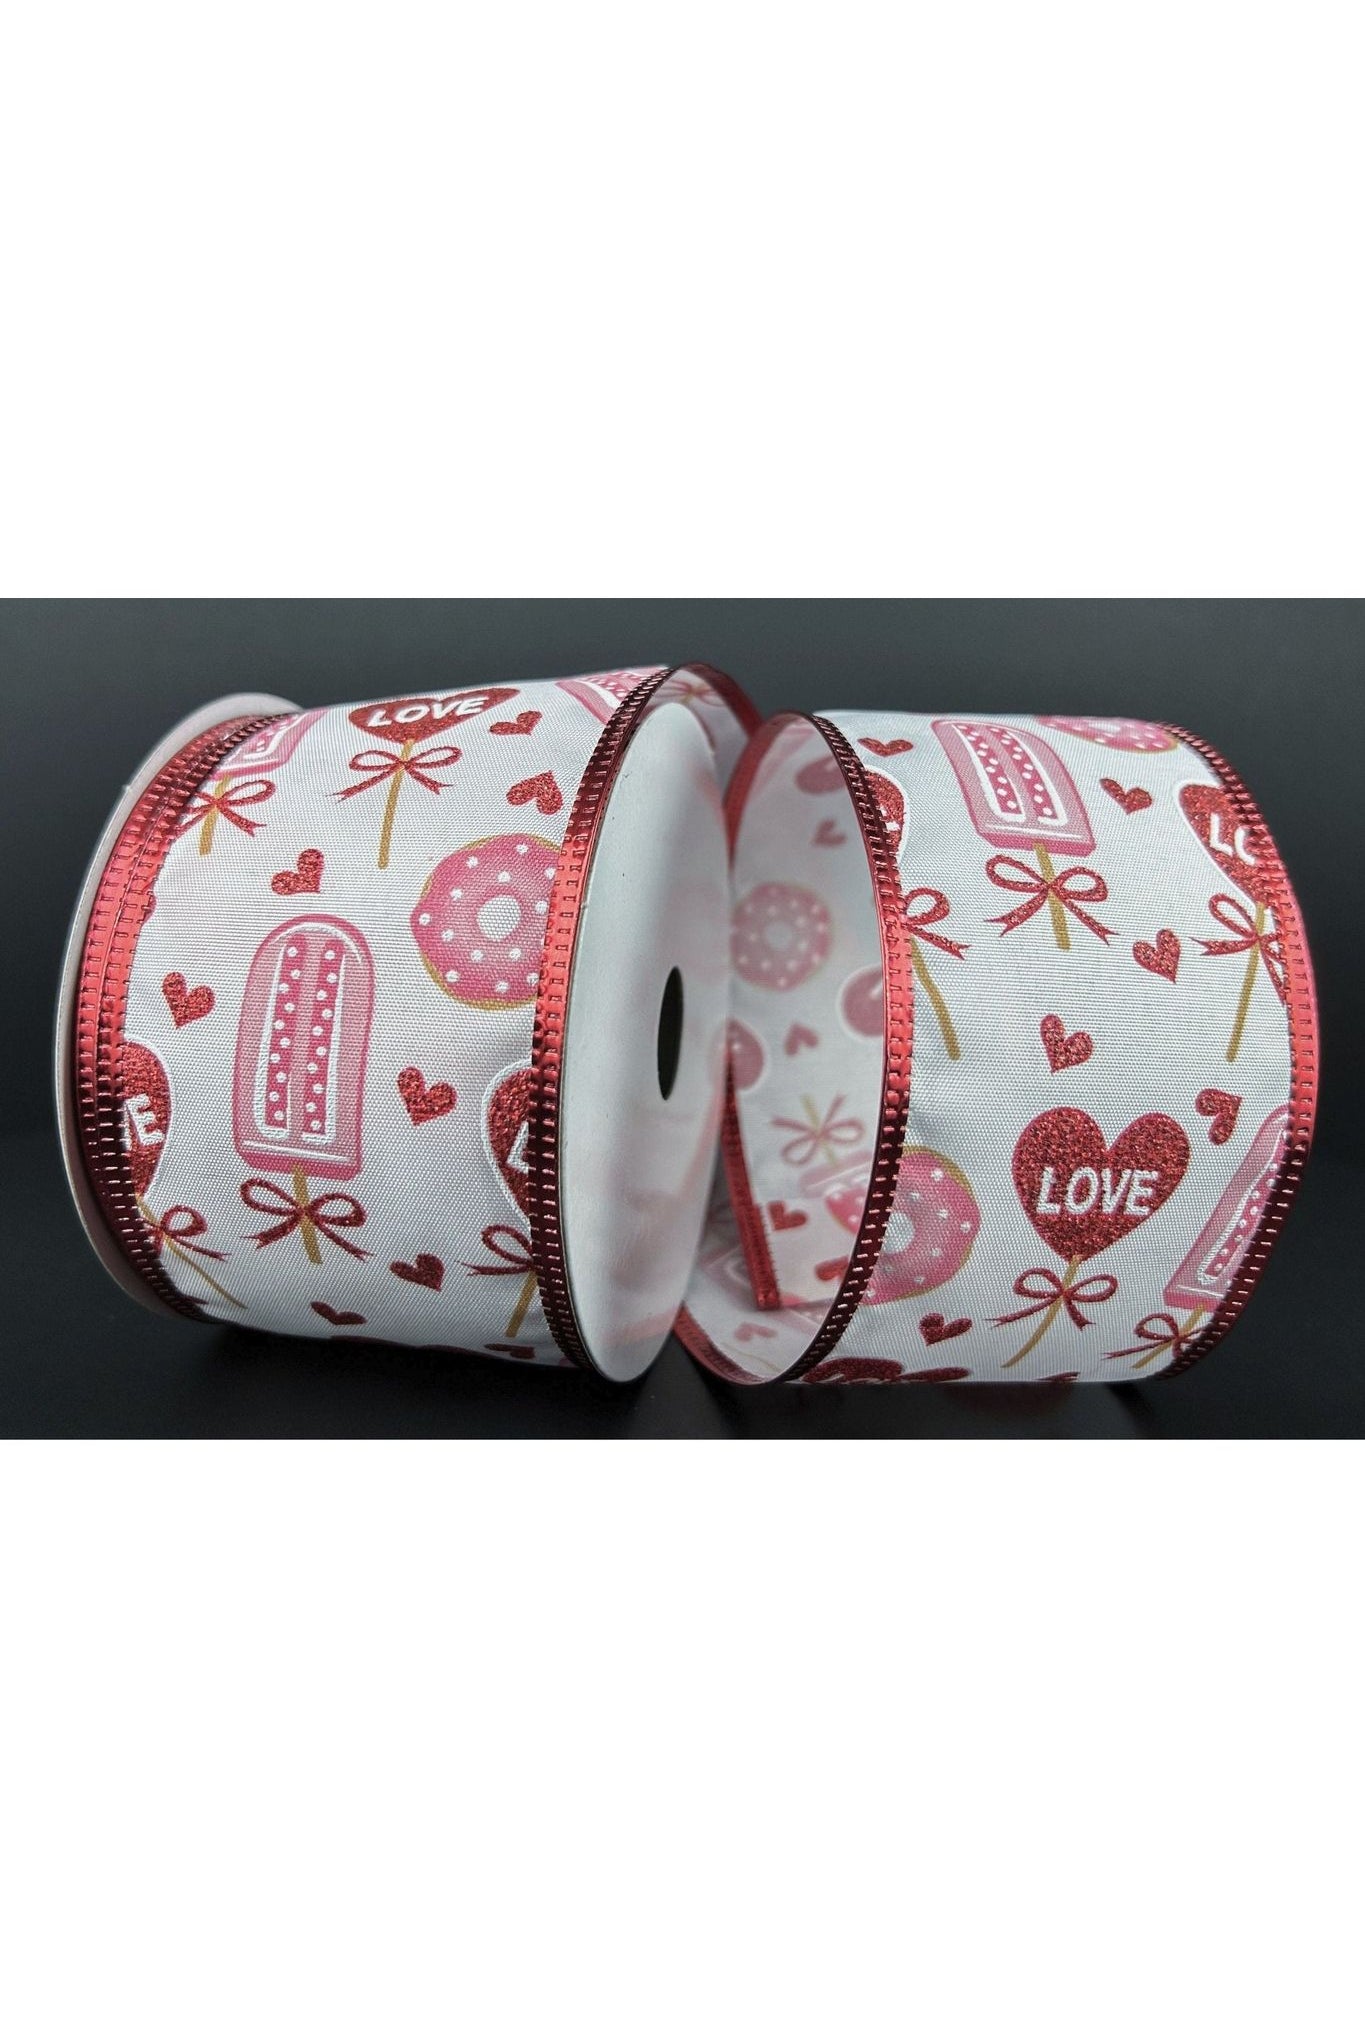 Shop For 2.5" Valentine Candy and Donuts Ribbon: White (10 Yards) 15401-40-01